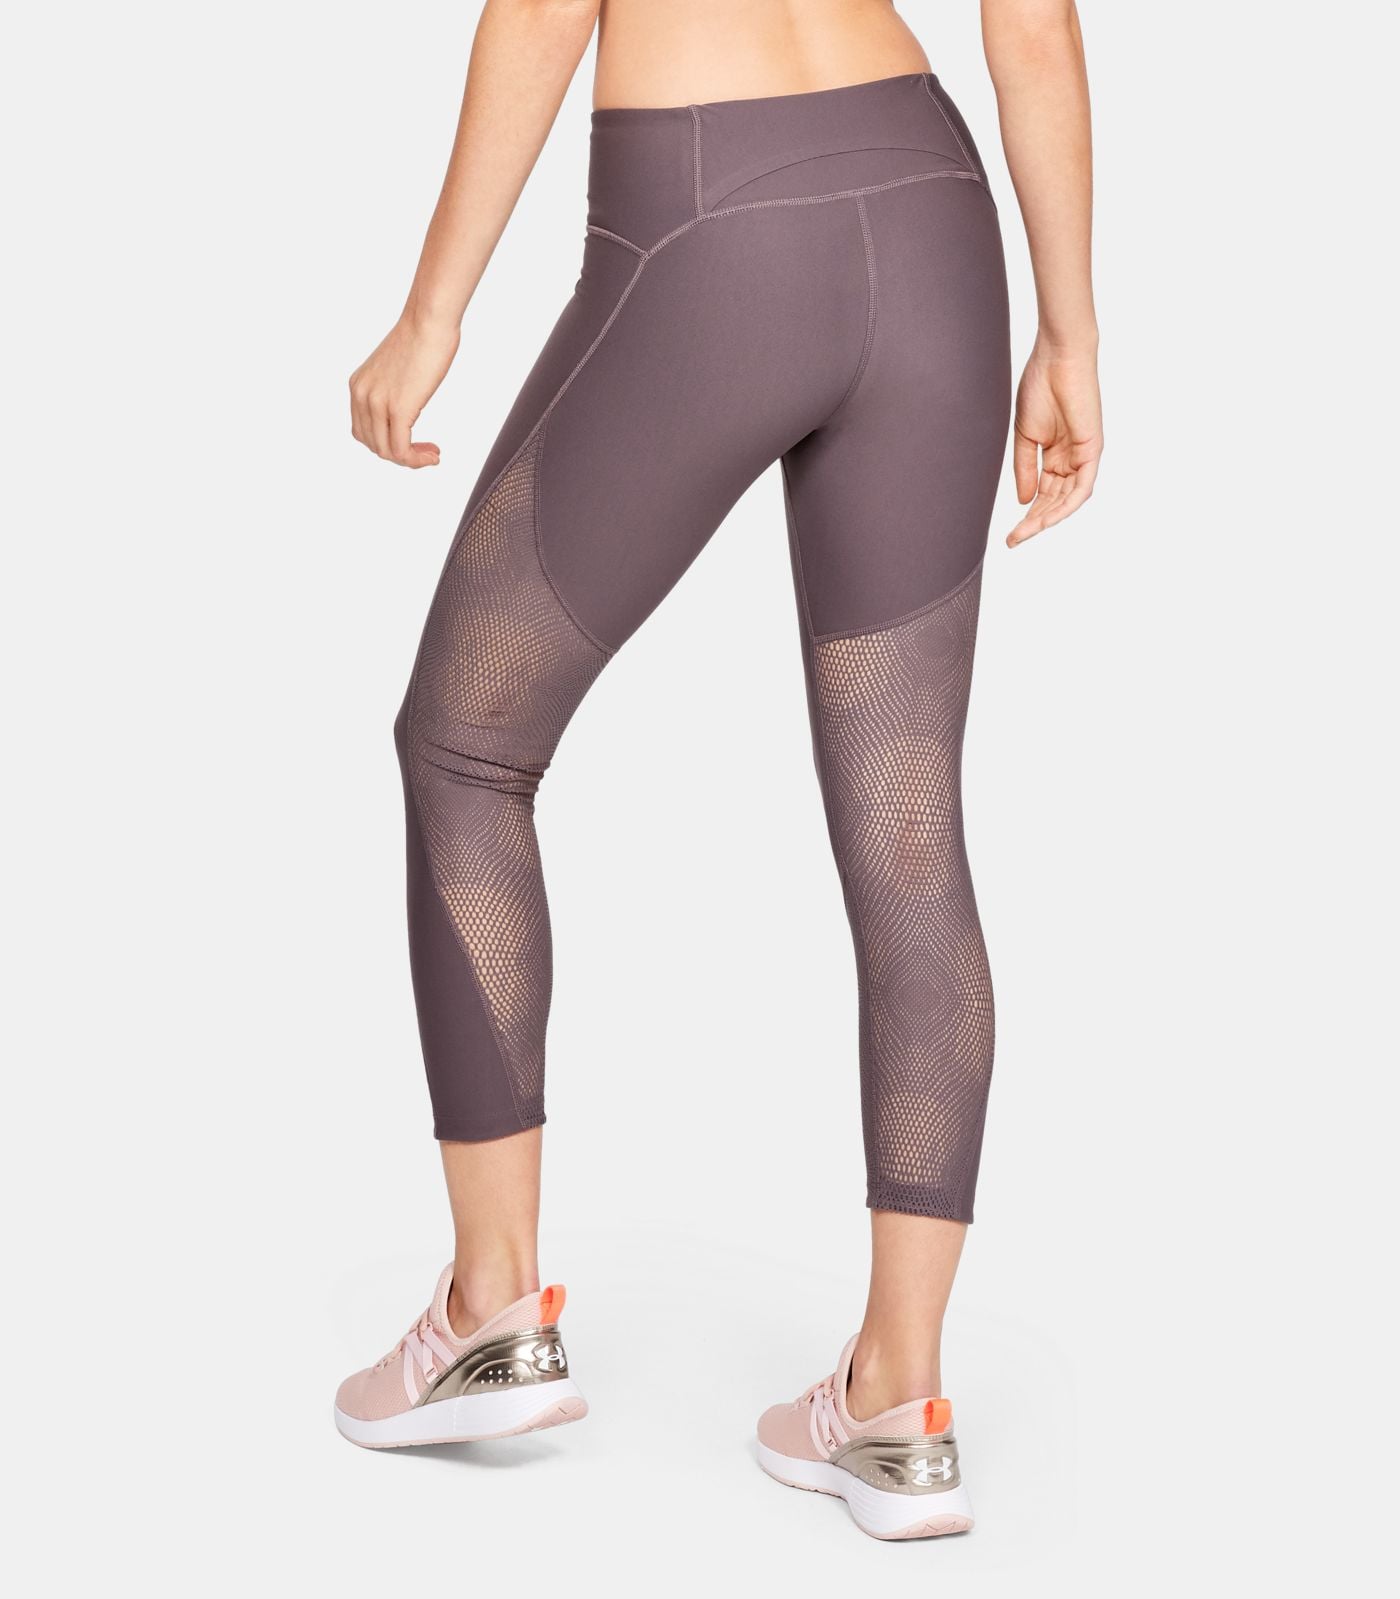 Under Armour Shatter II Capri Compression Grey XS  Leggings are not pants, Under  armour pants, Colorful leggings